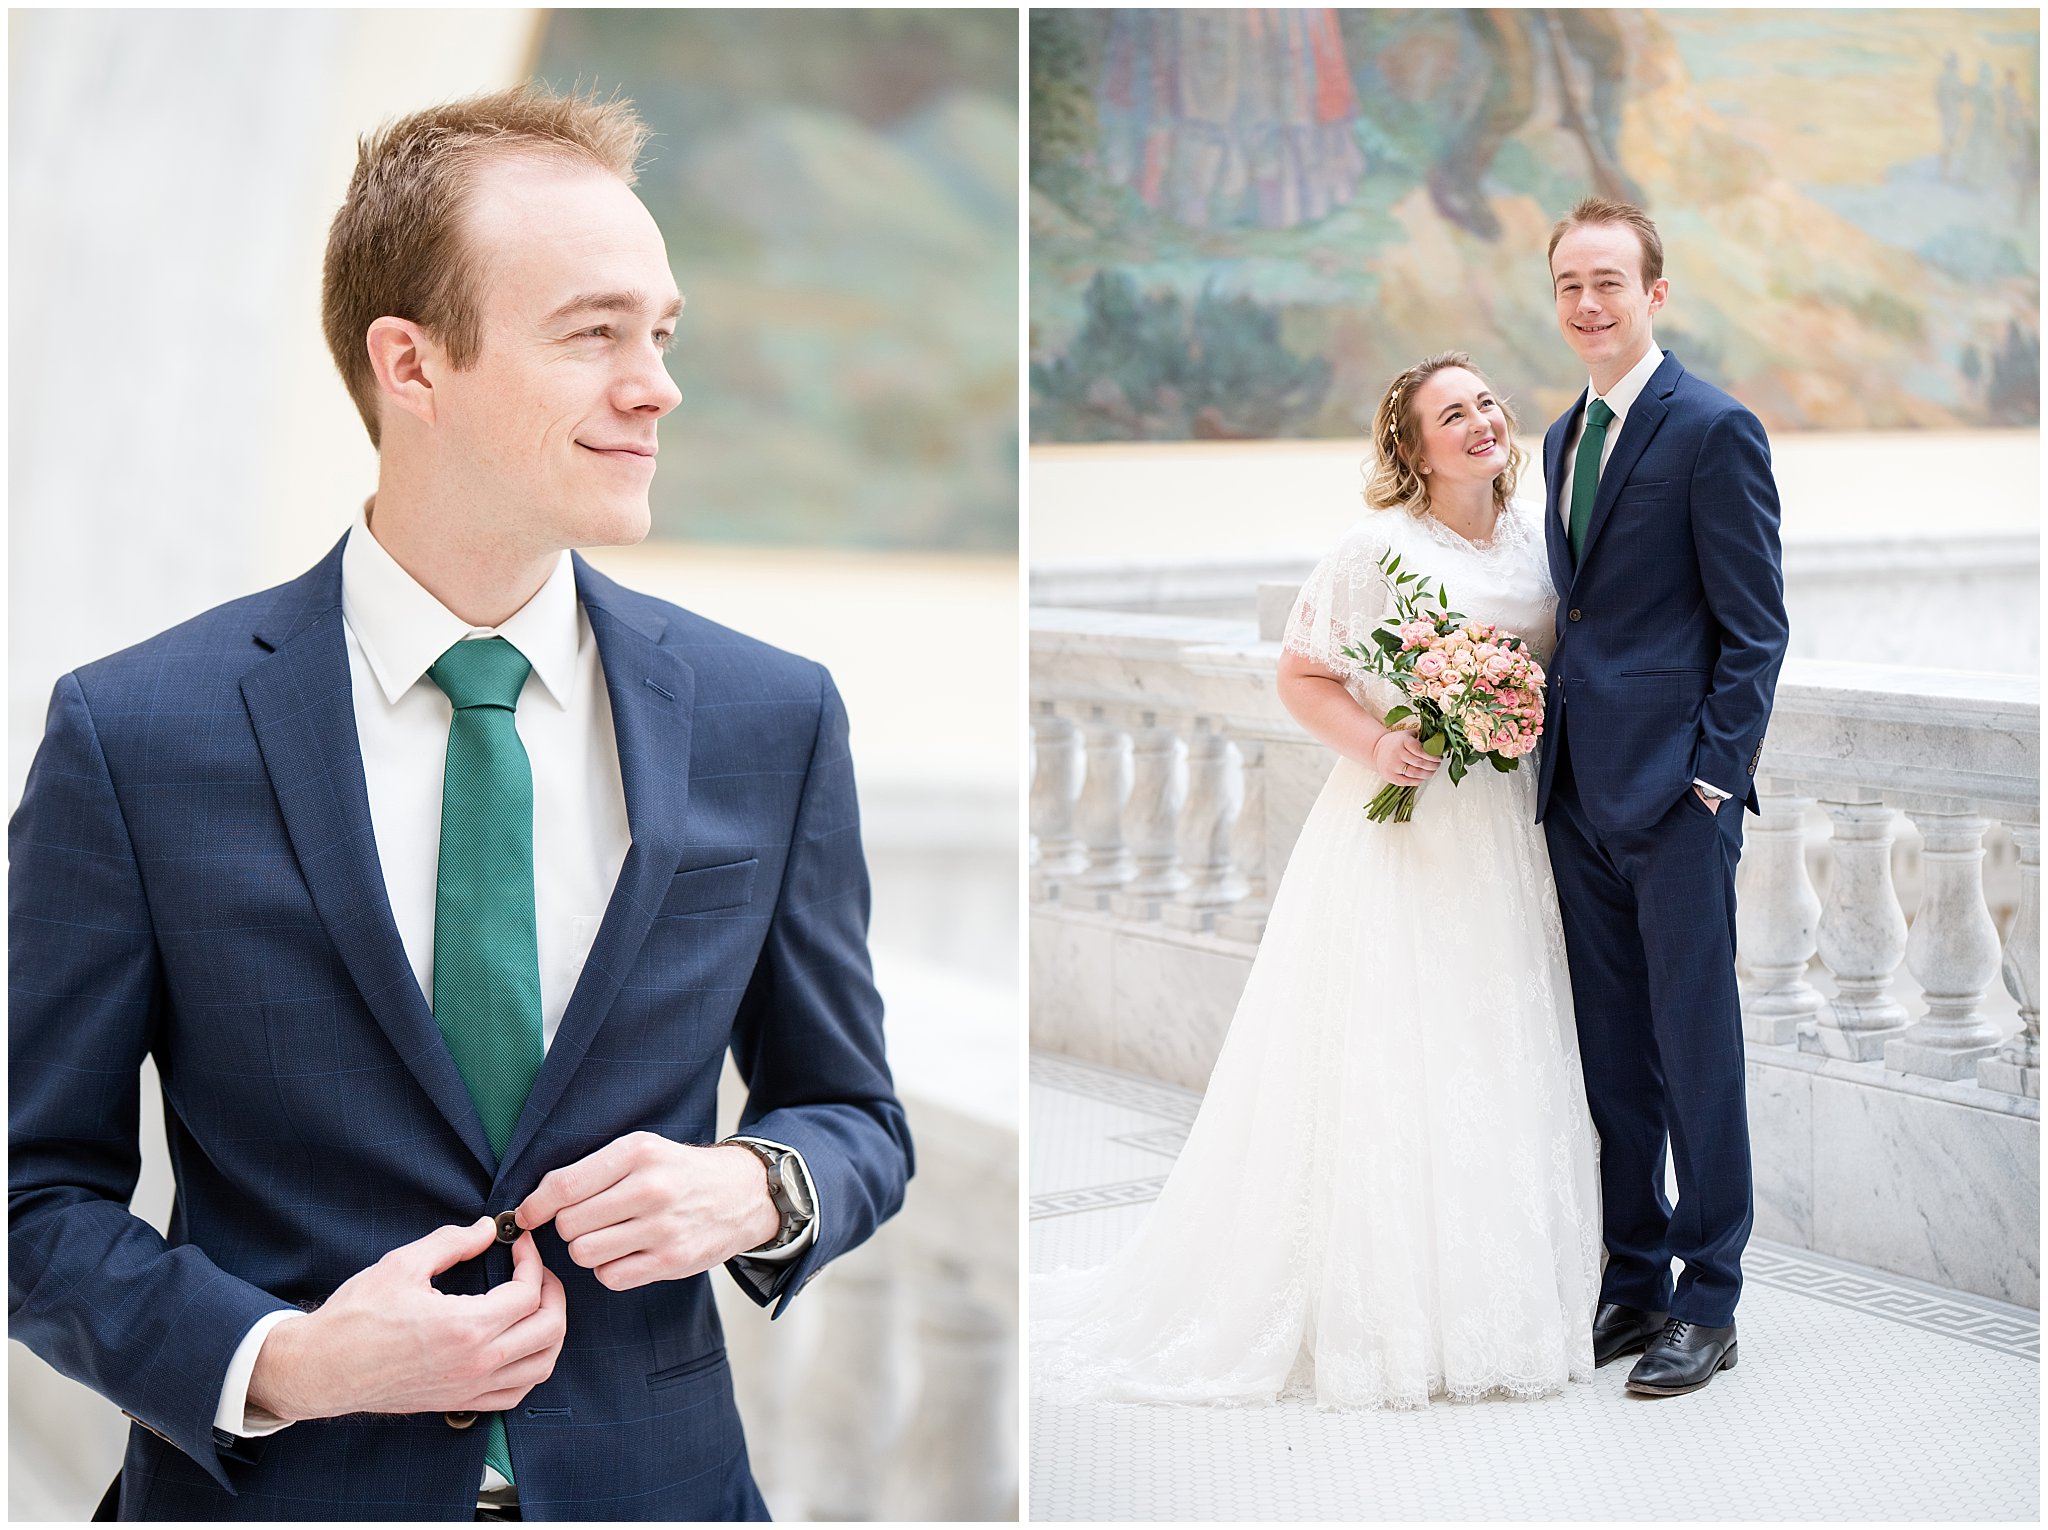 Groom buttoning suit and bride laughing at groom | Winter Formals at the Utah State Capitol | Utah Wedding Photography